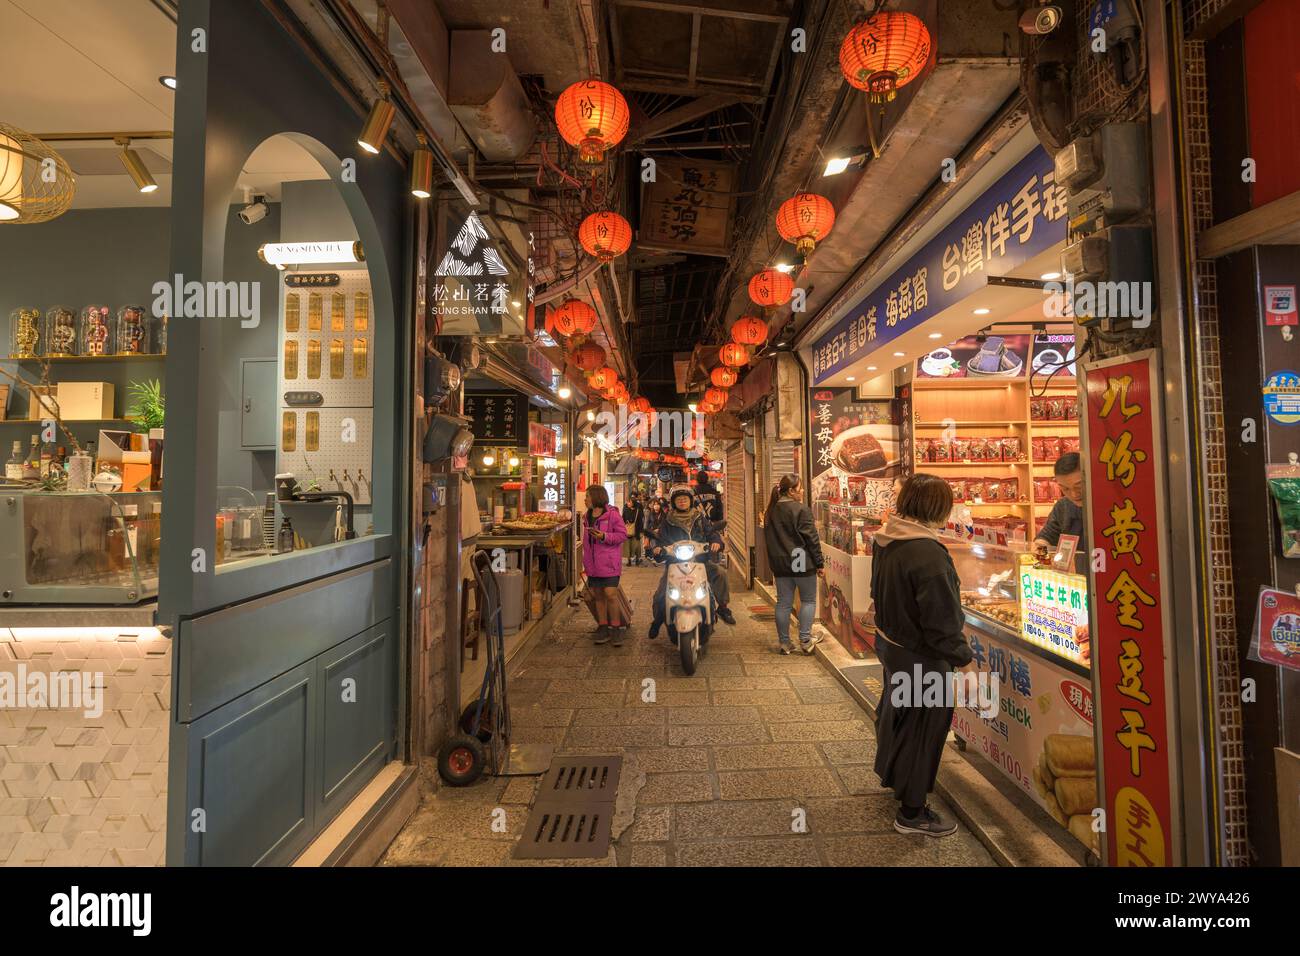 A crowded Jiufen night market lit by red lanterns with shops and people Stock Photo